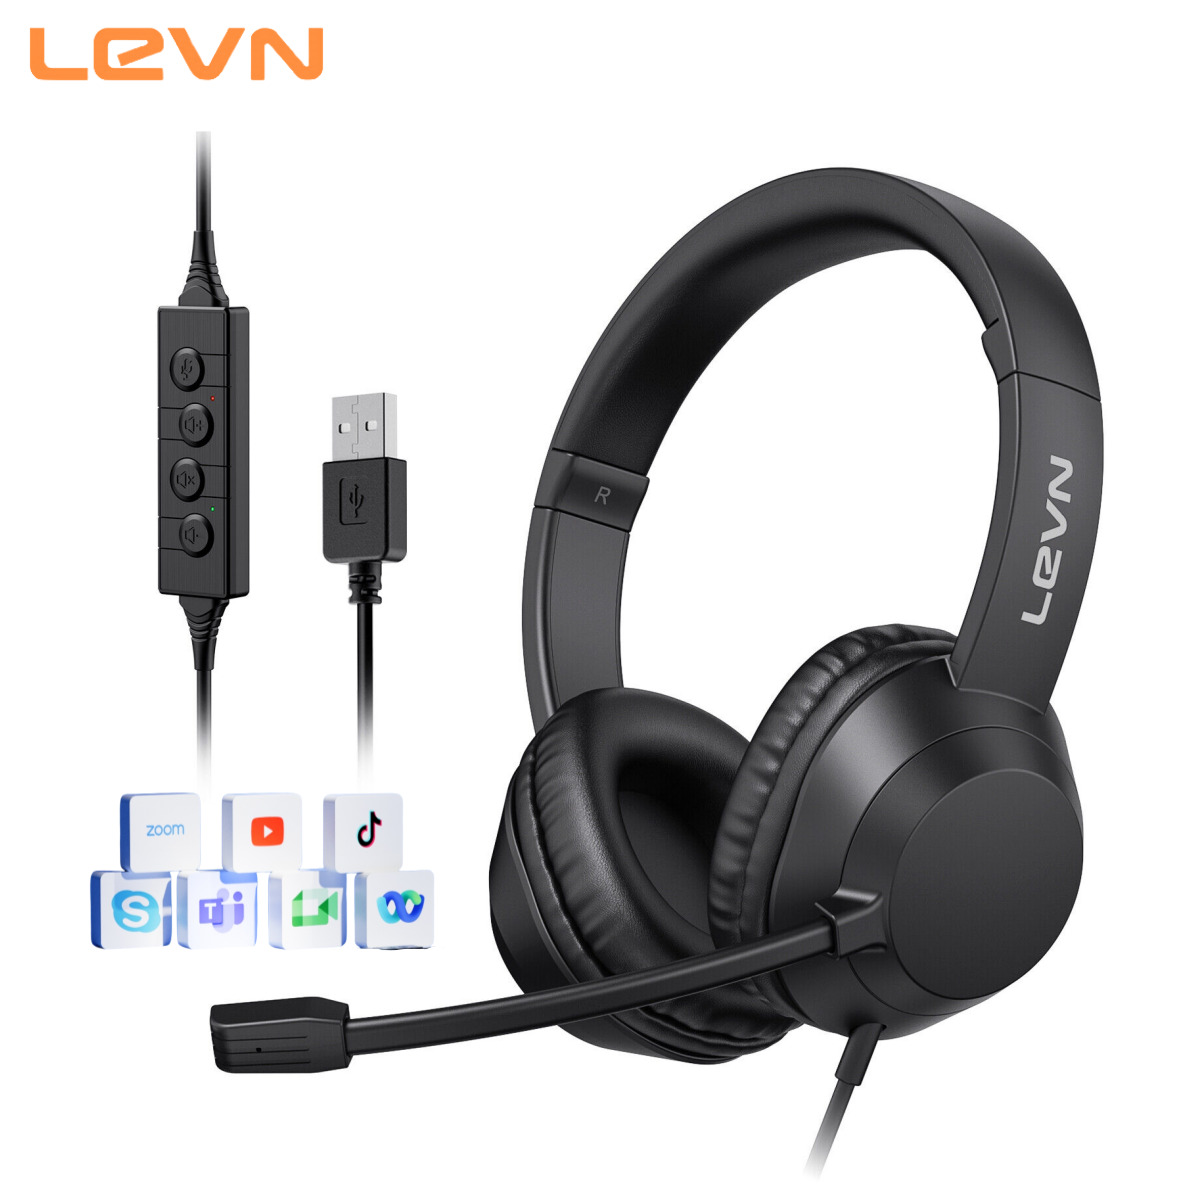 LEVN USB Headset For PC with Microphone Noise Cancelling & Audio Controls